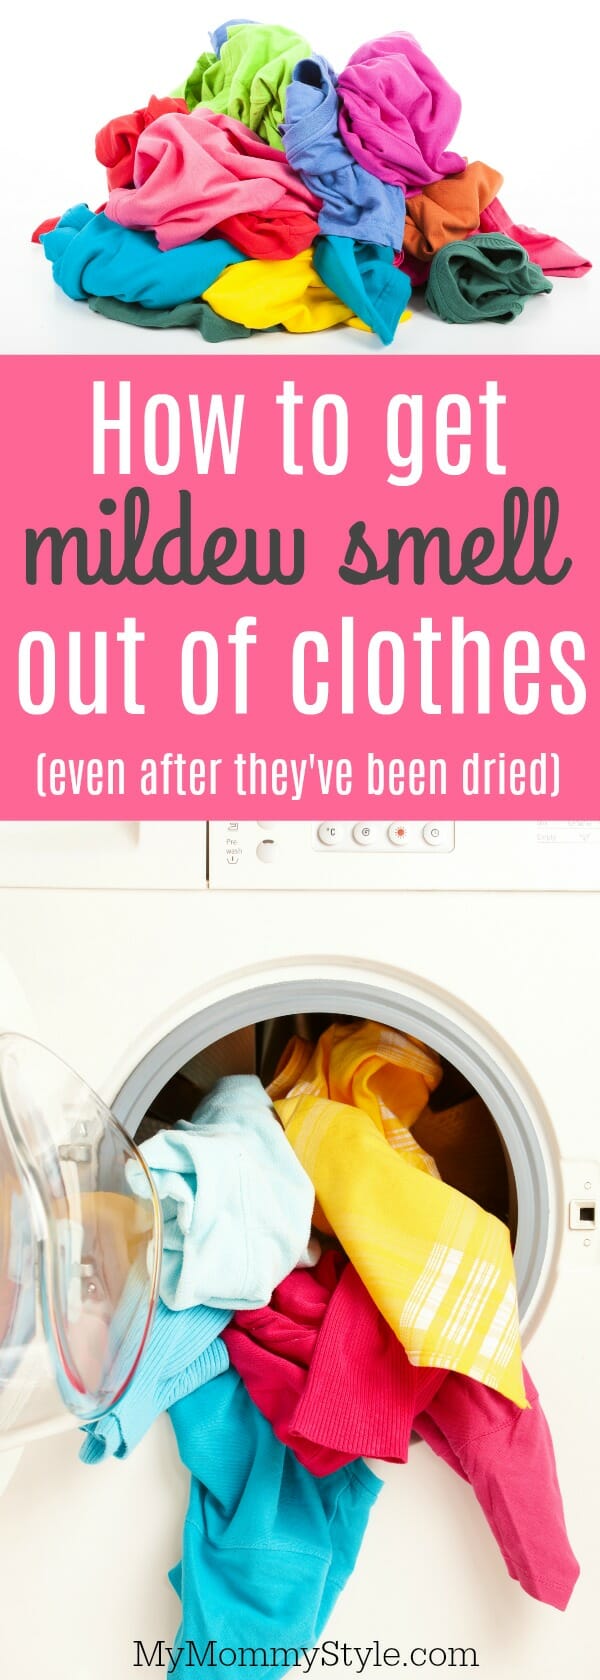 How to get mildew smell out of clothes - My Mommy Style